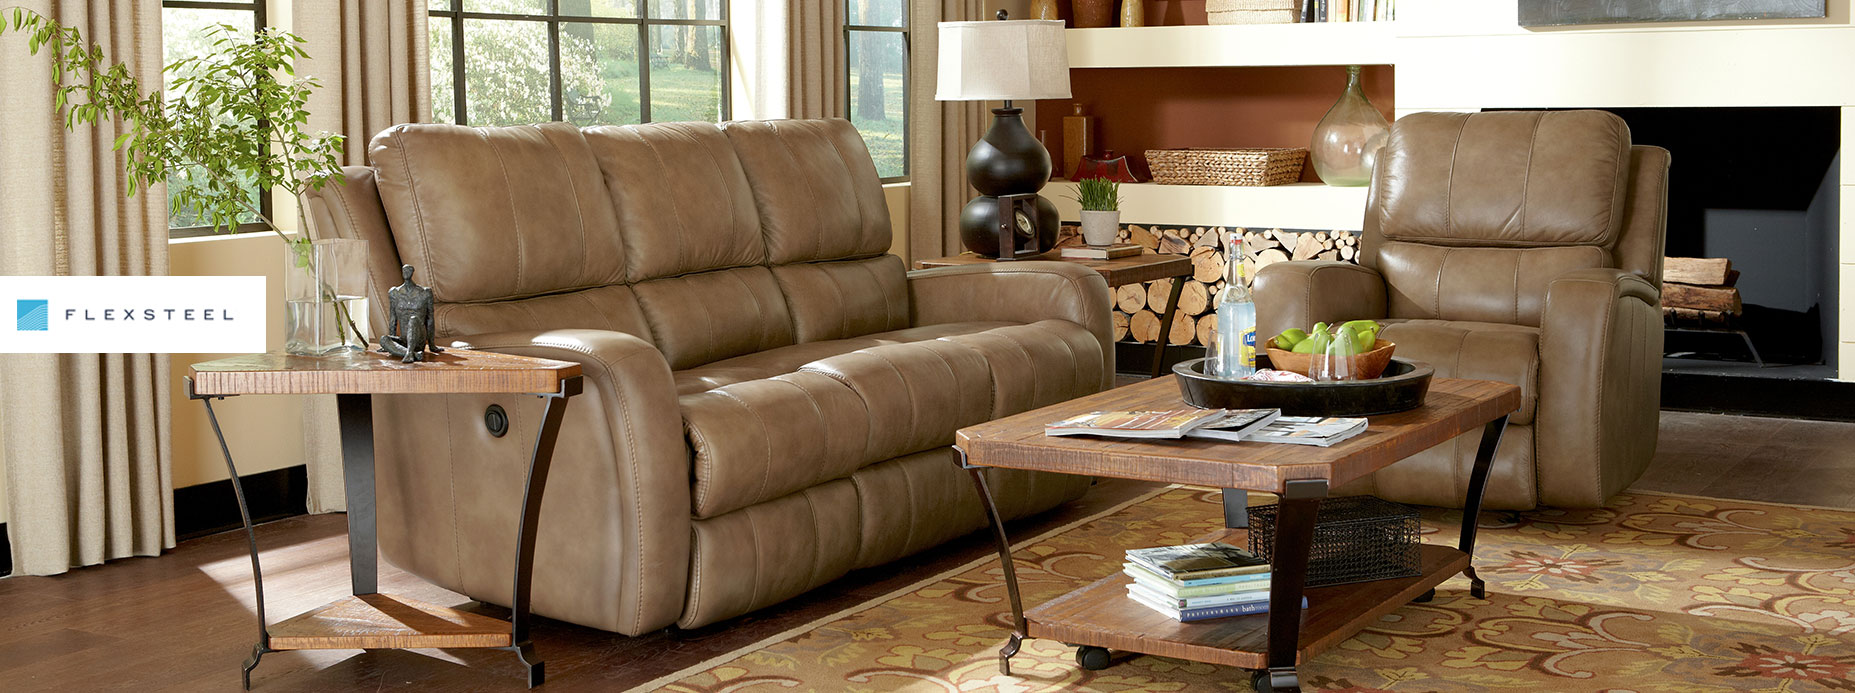 Flexsteel Furniture Discount Store And Showroom In Hickory NC 28602